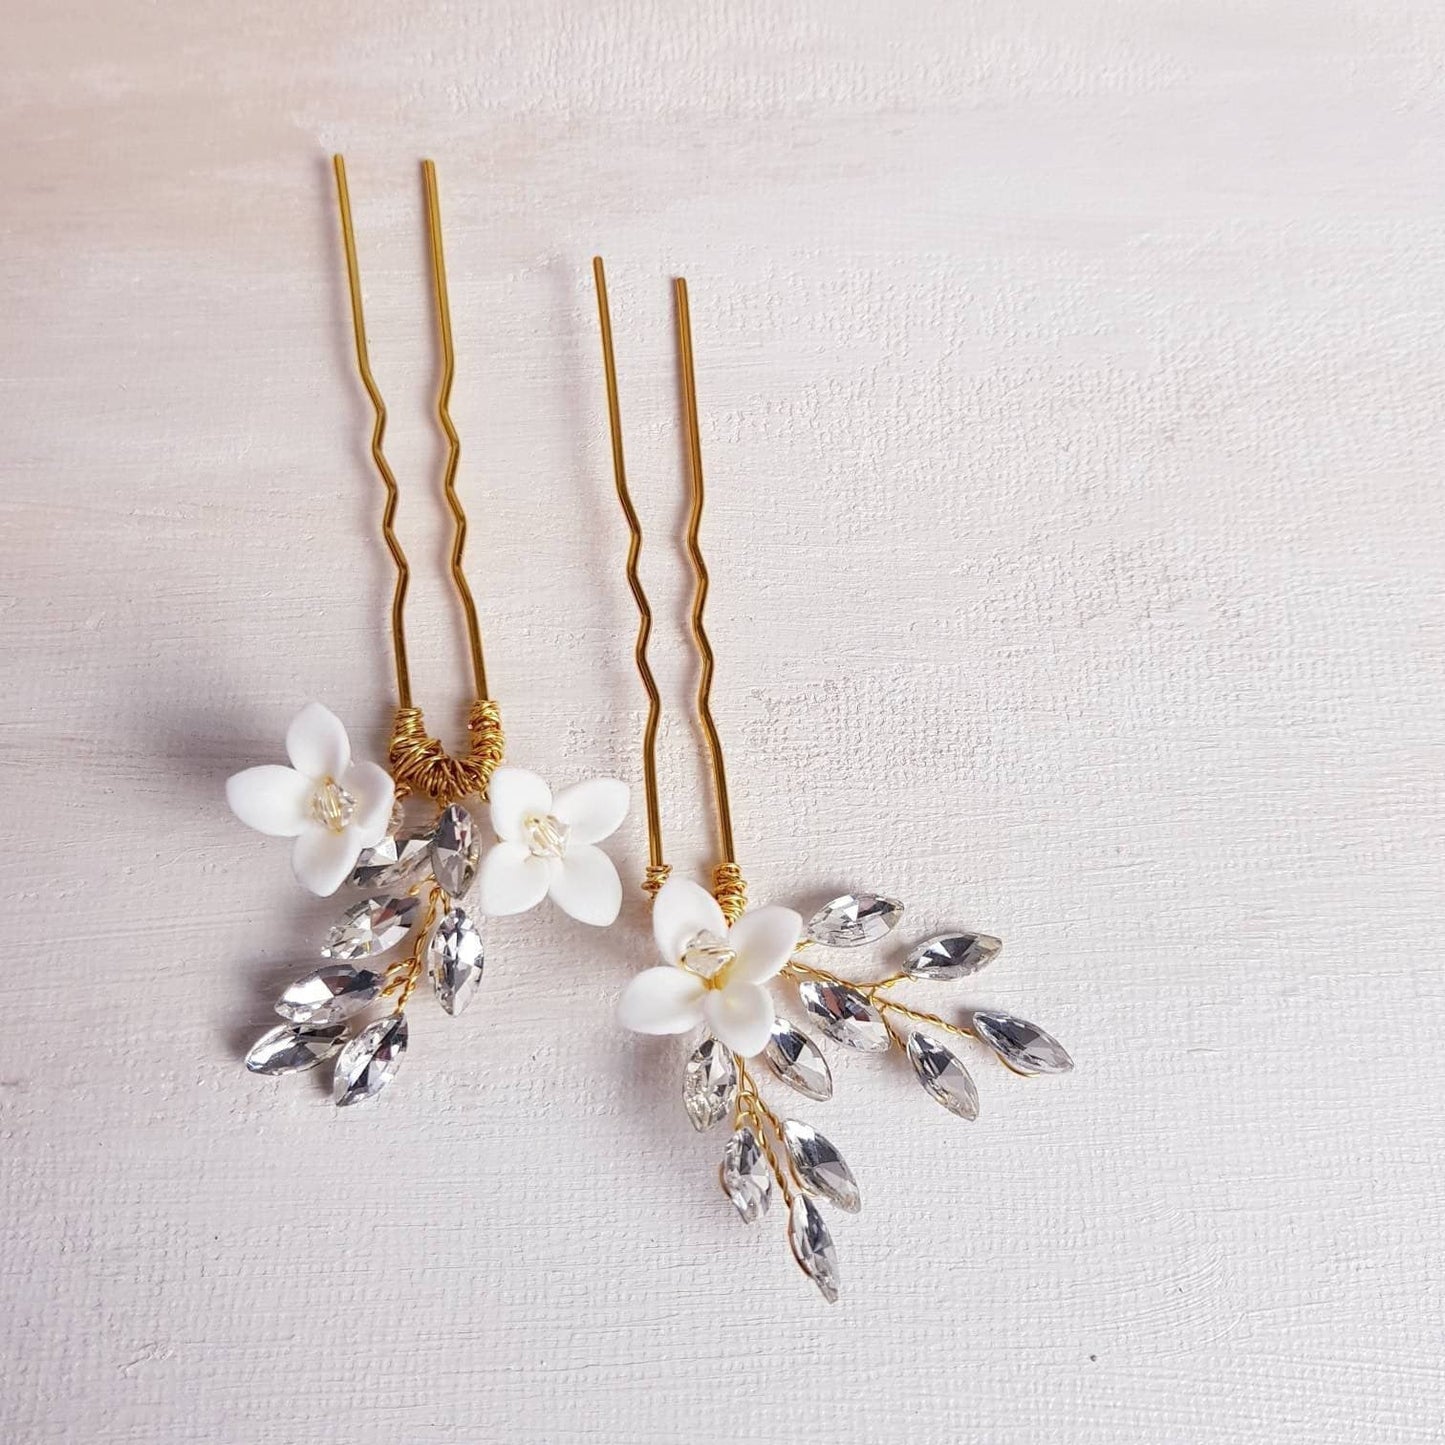 BOUTIQUEBYBRENDALEE FEUILLES BLING Haircomb hairpins small white porcelain flowers Hair Pin Headpiece Accessory gold comb hair forks picks